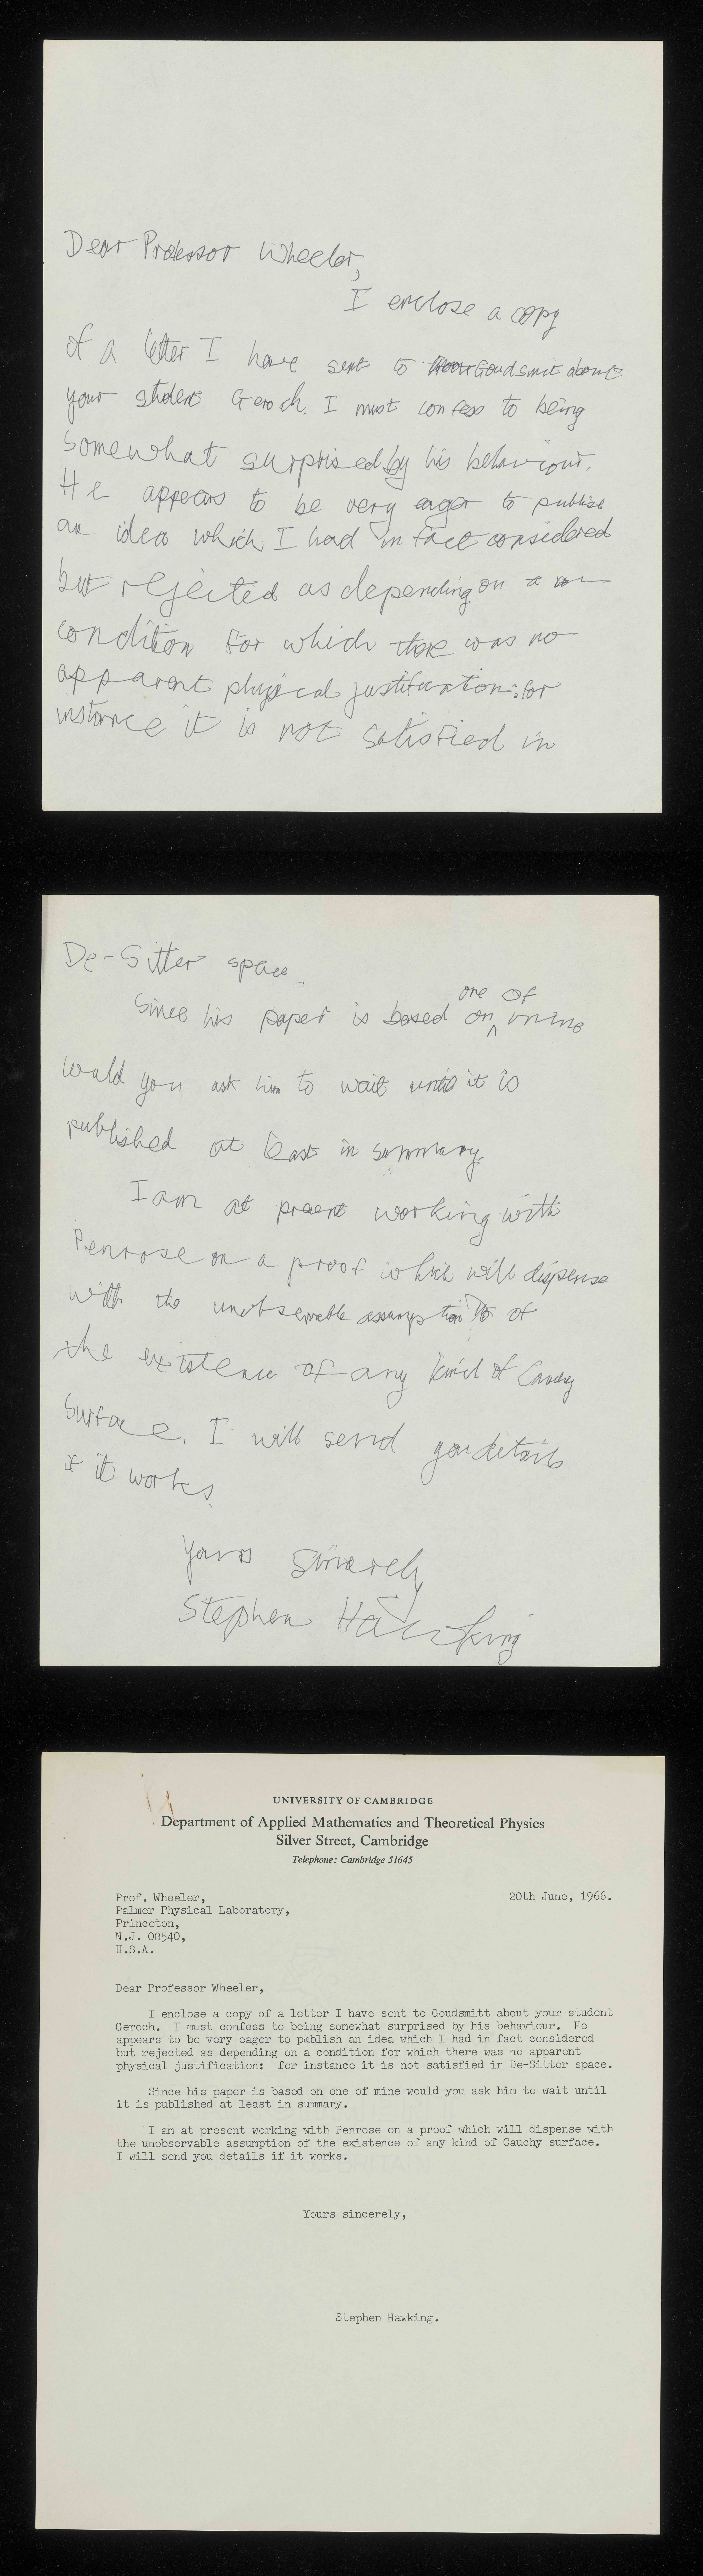 A draft letter to John Wheeler from Stephen Hawking with typed version